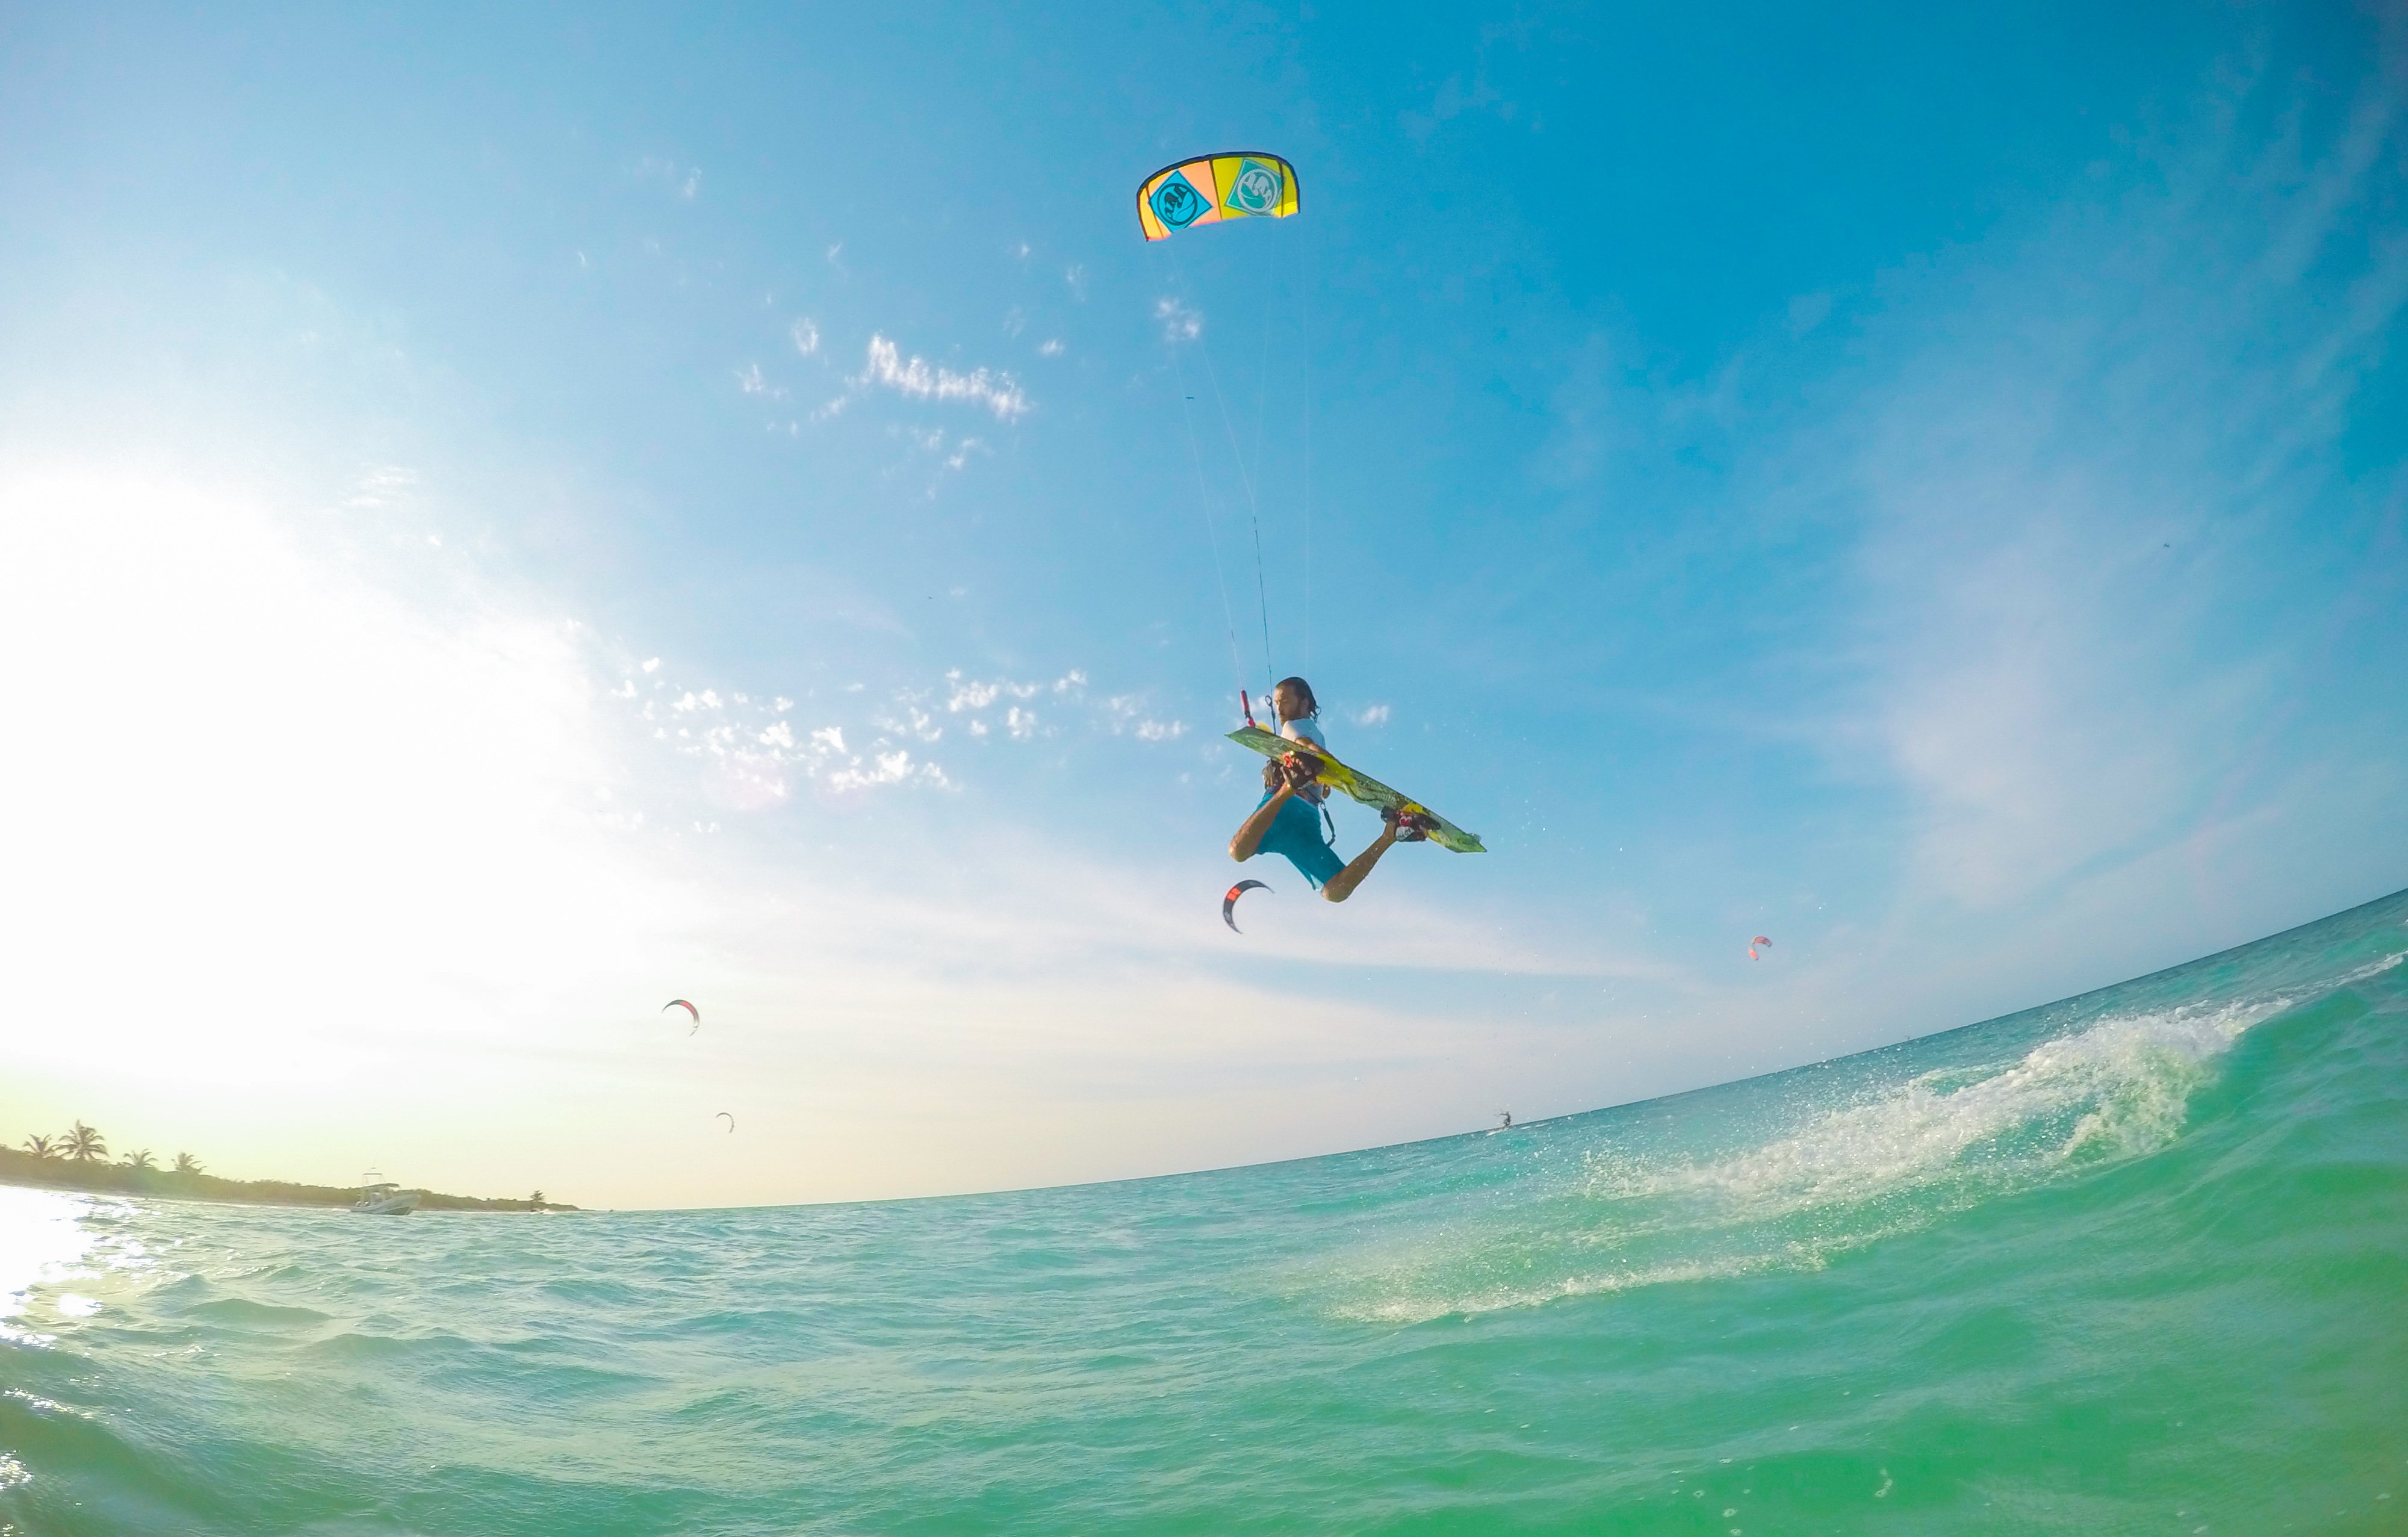 Why you should grab a kite and a board and get on the water?